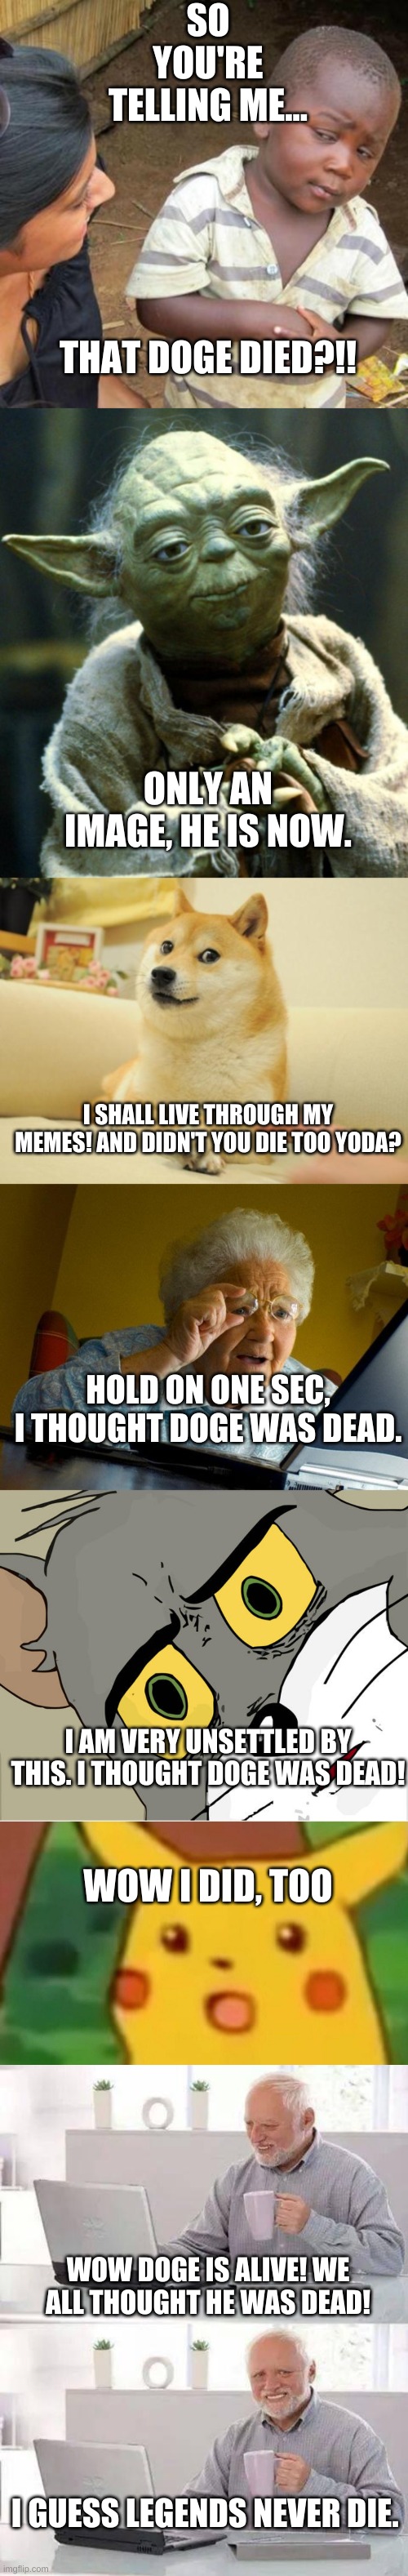 Only real memers will understand | SO YOU'RE TELLING ME... THAT DOGE DIED?!! ONLY AN IMAGE, HE IS NOW. I SHALL LIVE THROUGH MY MEMES! AND DIDN'T YOU DIE TOO YODA? HOLD ON ONE SEC, I THOUGHT DOGE WAS DEAD. I AM VERY UNSETTLED BY THIS. I THOUGHT DOGE WAS DEAD! WOW I DID, TOO; WOW DOGE IS ALIVE! WE ALL THOUGHT HE WAS DEAD! I GUESS LEGENDS NEVER DIE. | image tagged in memes,grandma finds the internet,third world skeptical kid,doge 2,star wars yoda,hide the pain harold | made w/ Imgflip meme maker